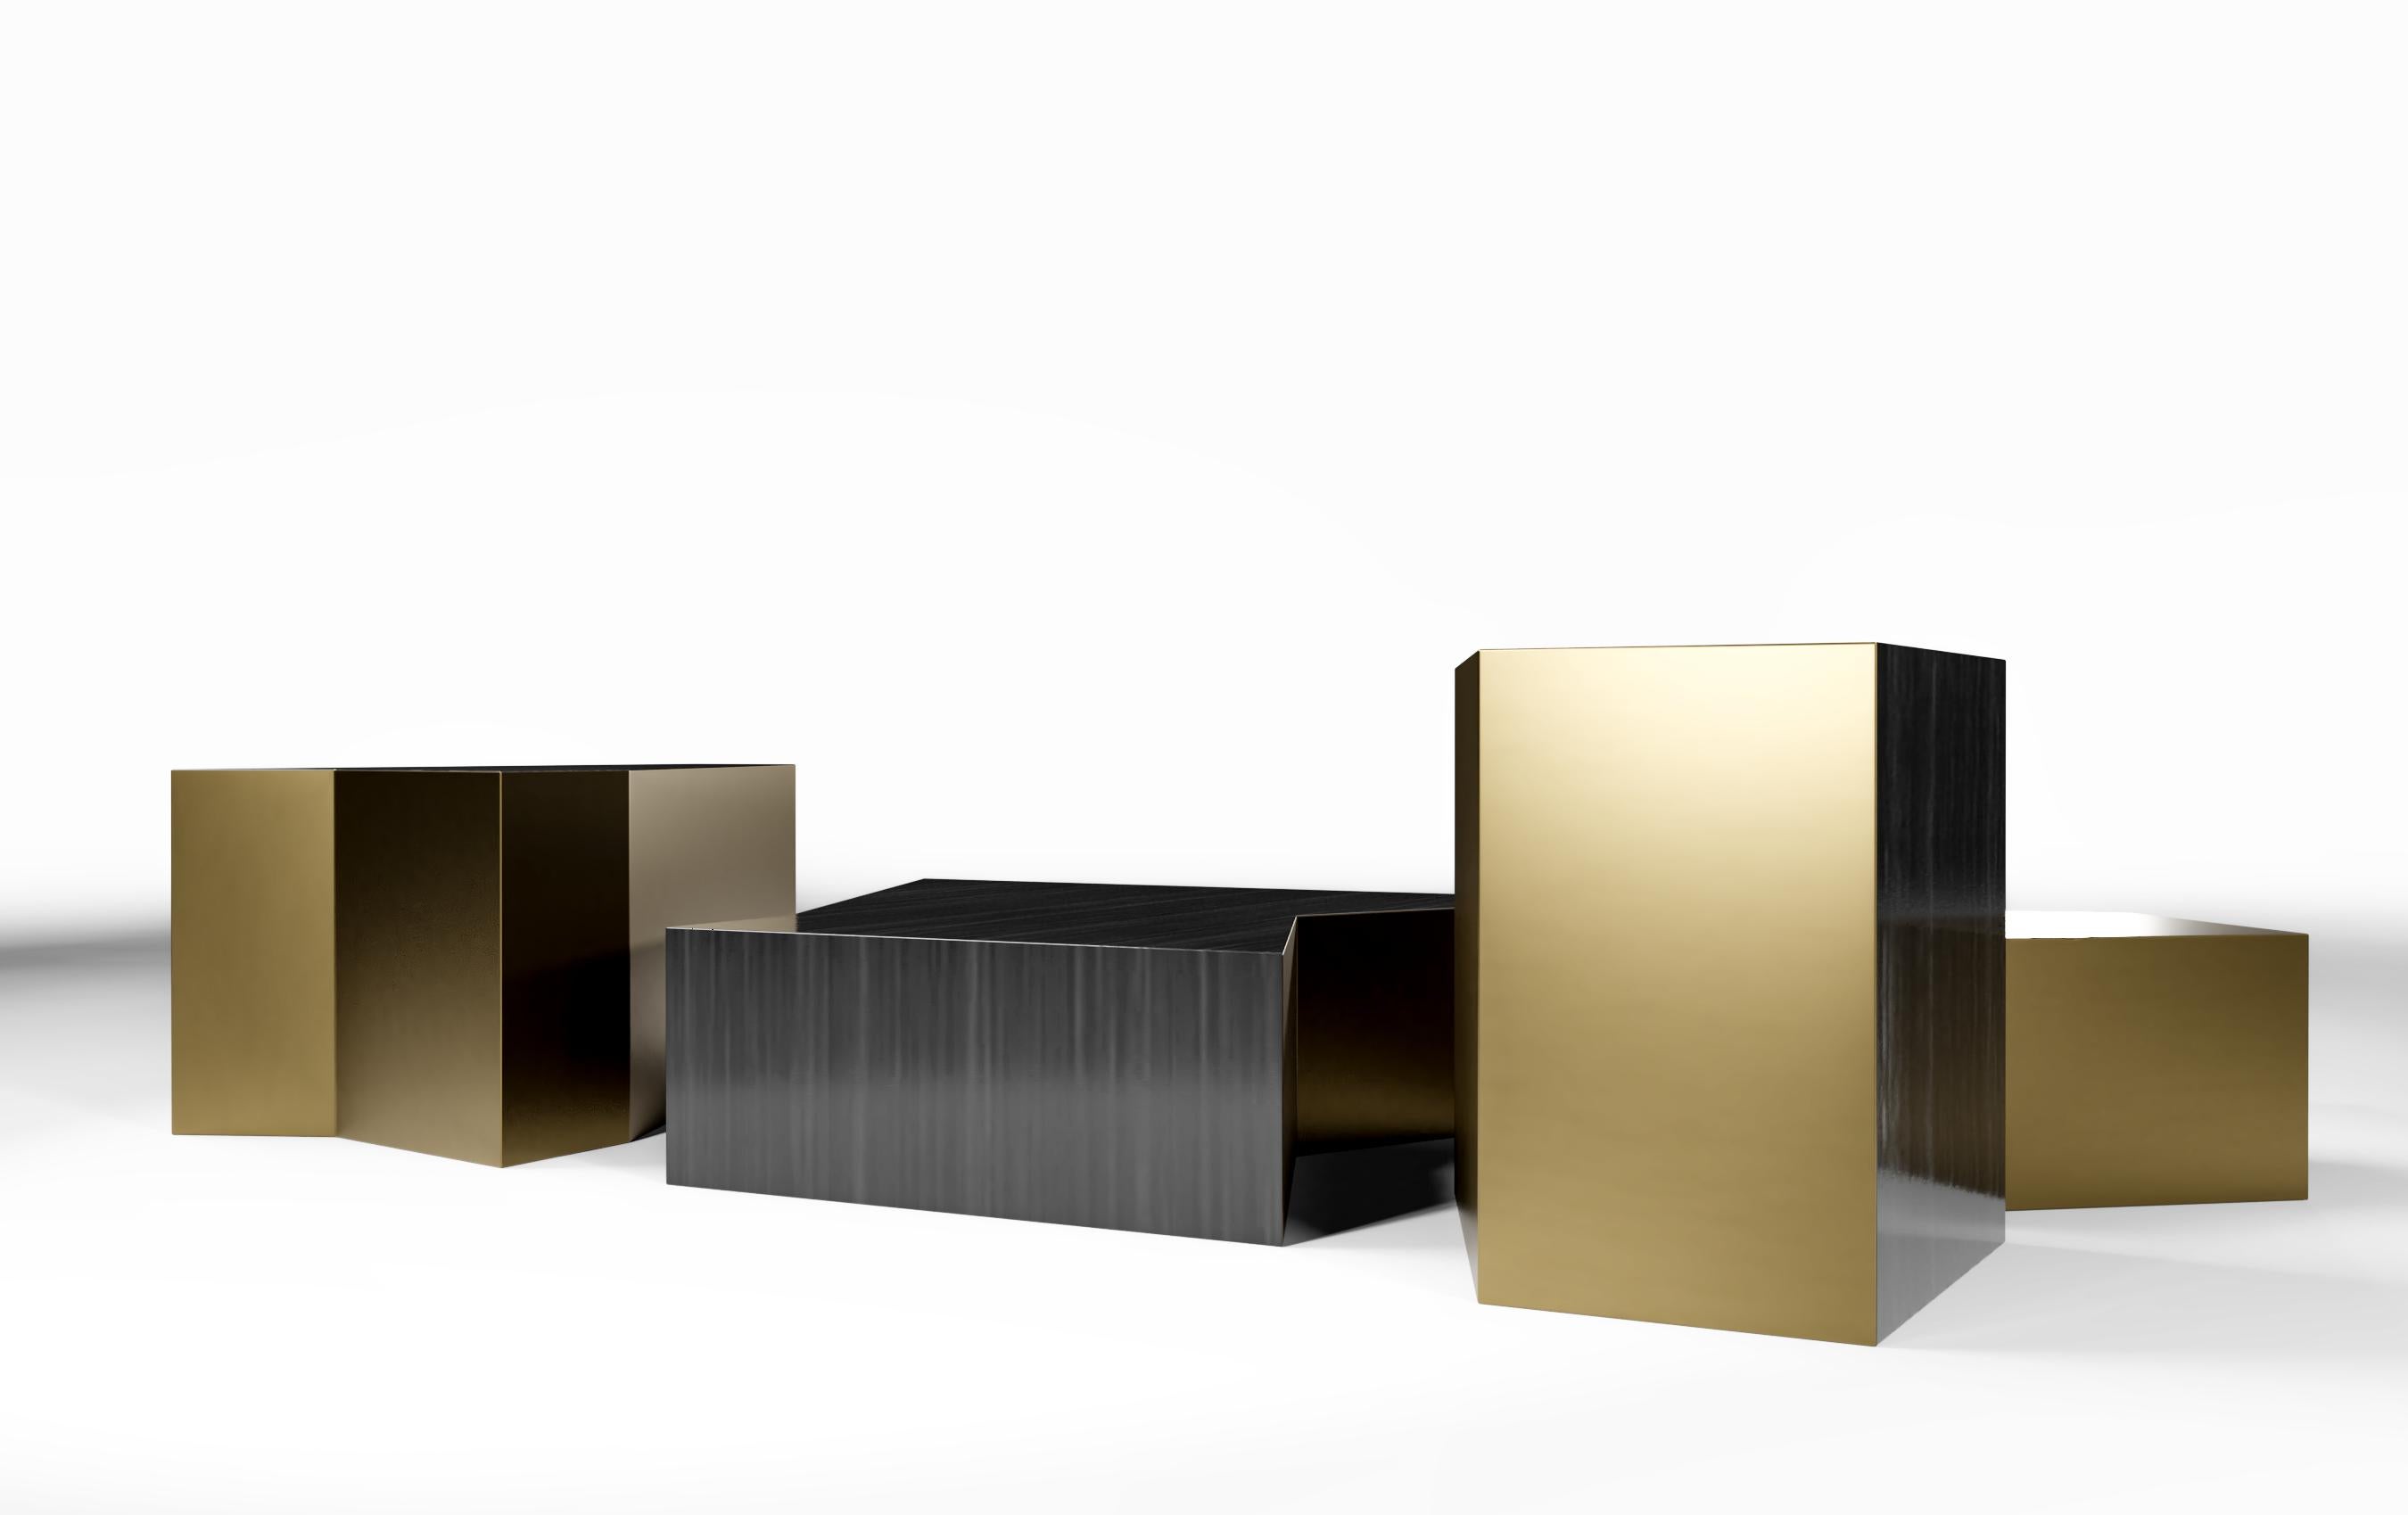 With 4 unique sculptural pieces of varying sizes, finishes and elevations, the wedge coffee table pieces are independent, but blend harmoniously together. The coffee table has a body of smoked eucalyptus high gloss wood finish with sides of